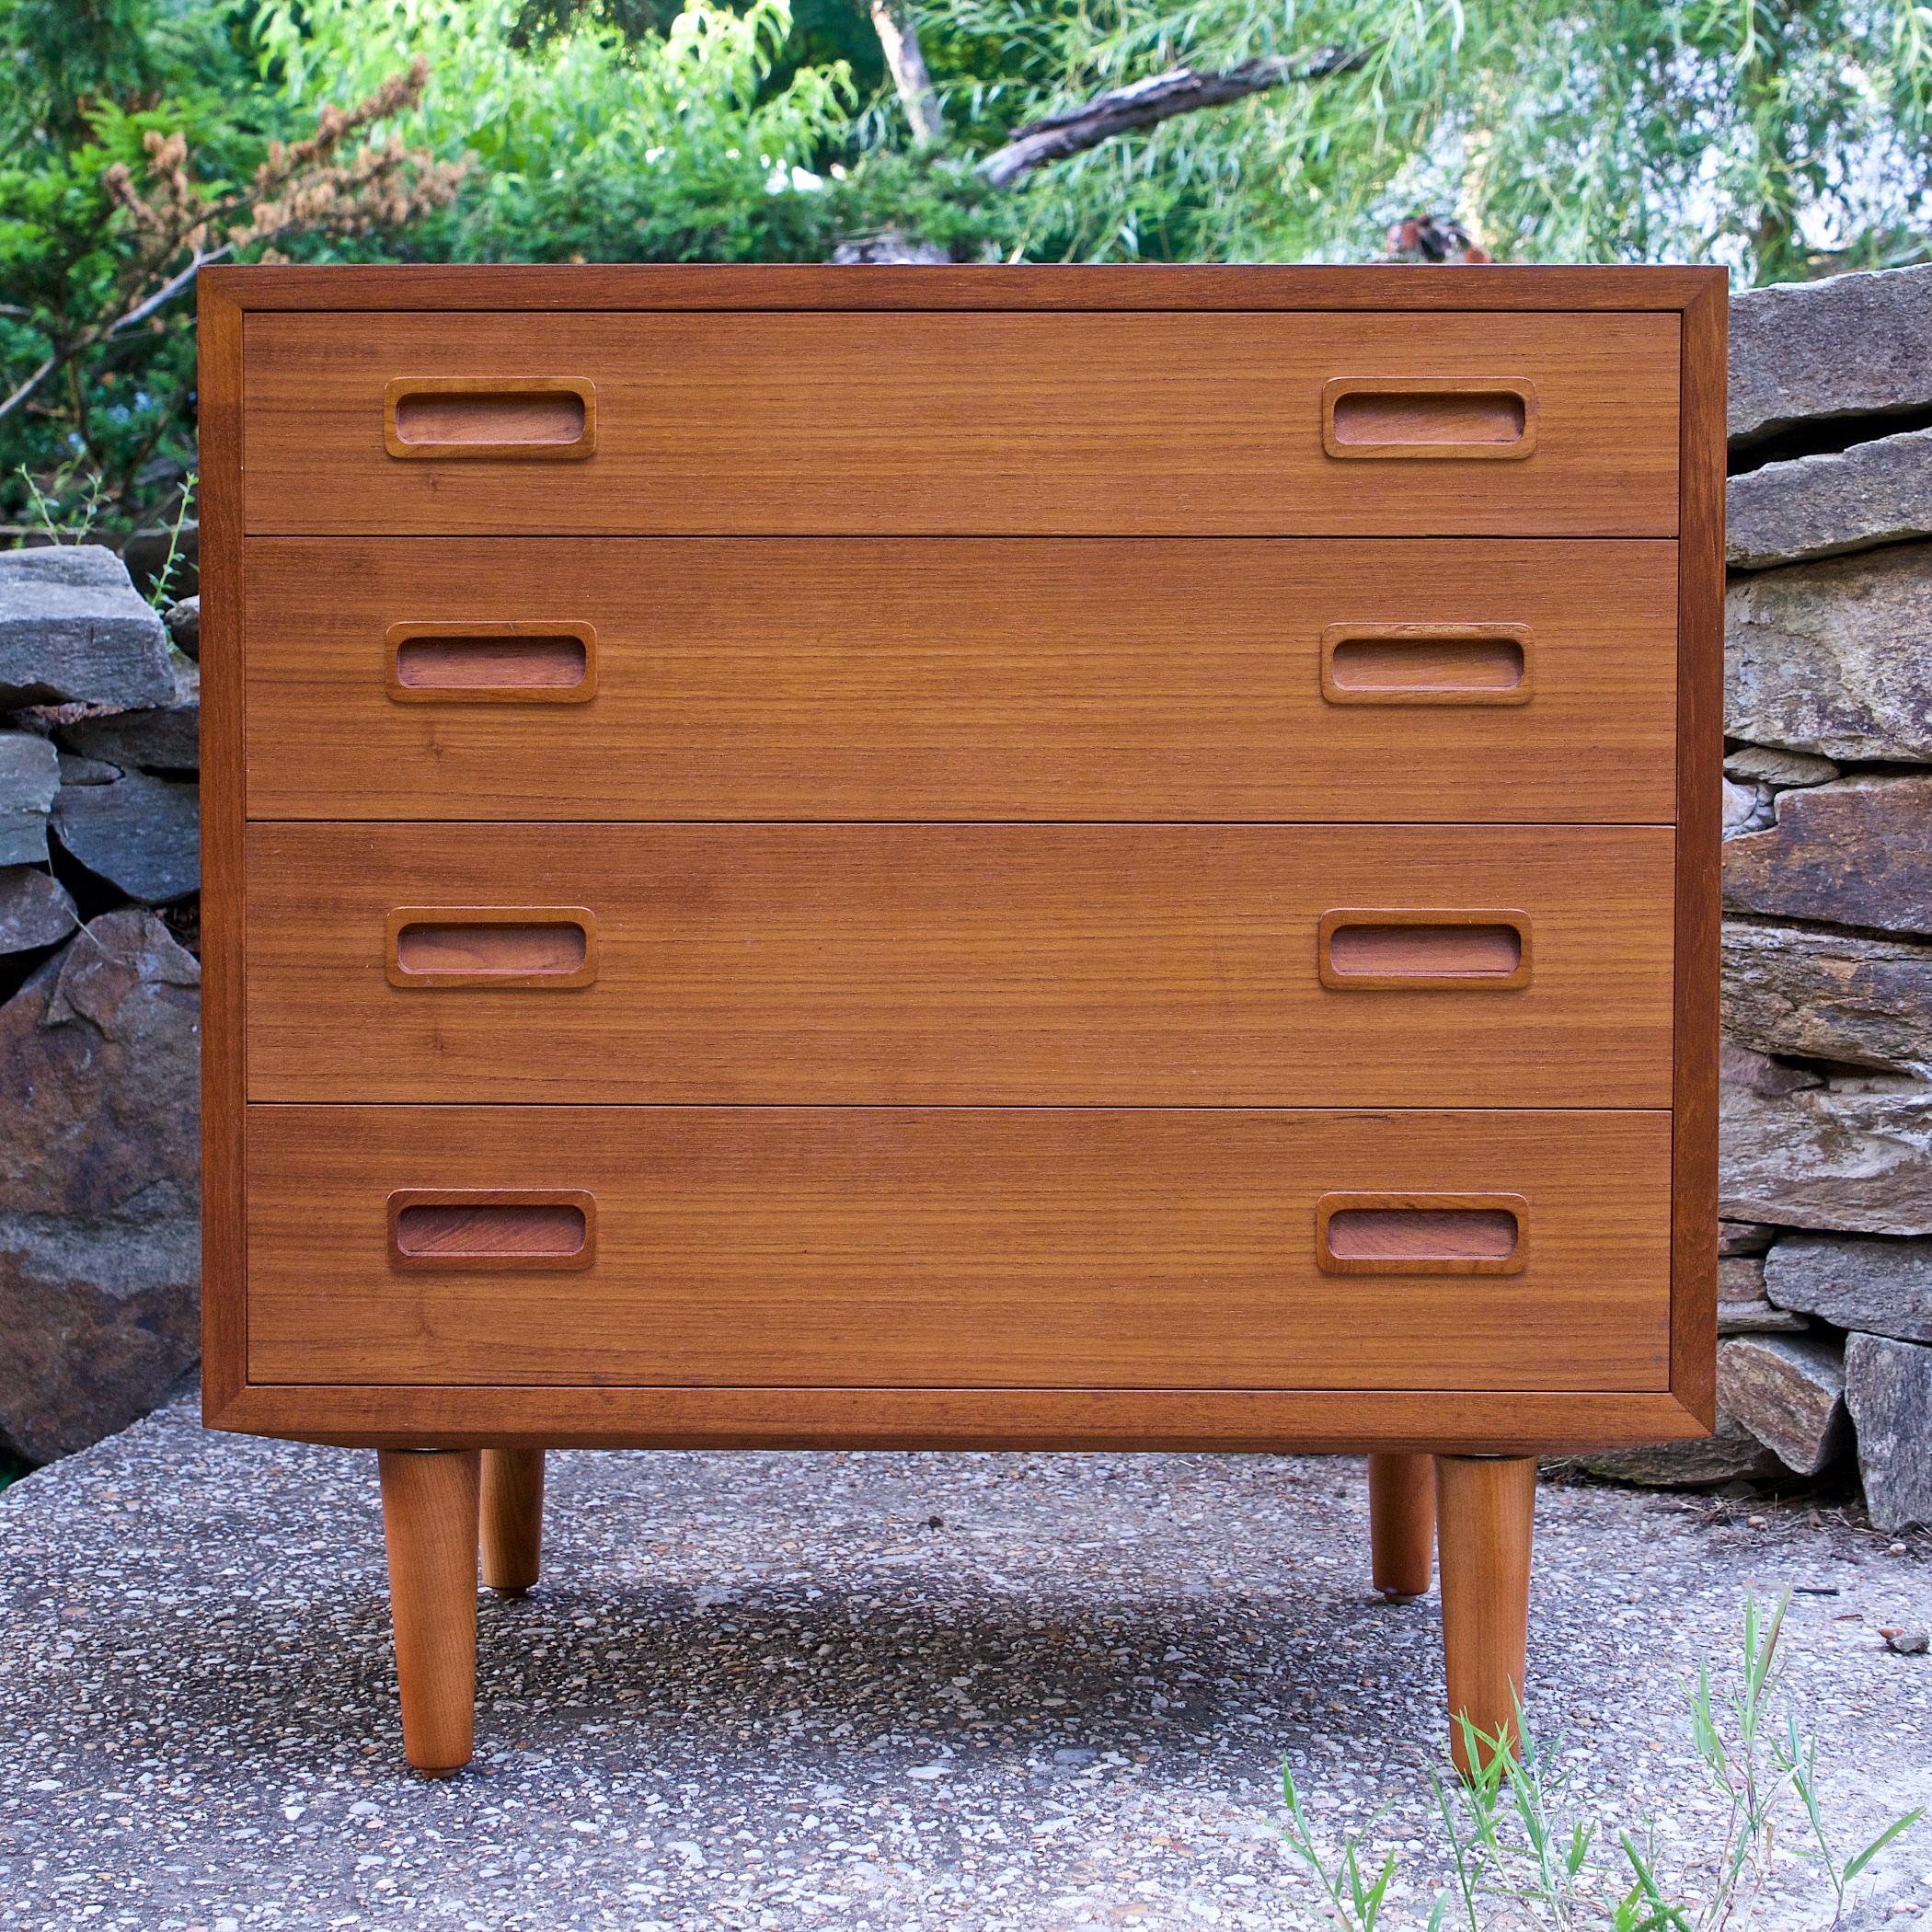 Rare inset minimalist drawer pulls, and wonderful figured side grain on each side of the case, bookmatched grain up one side across the top and down the other. A clean unit with smooth functioning drawers. We also have a matching double bank dresser